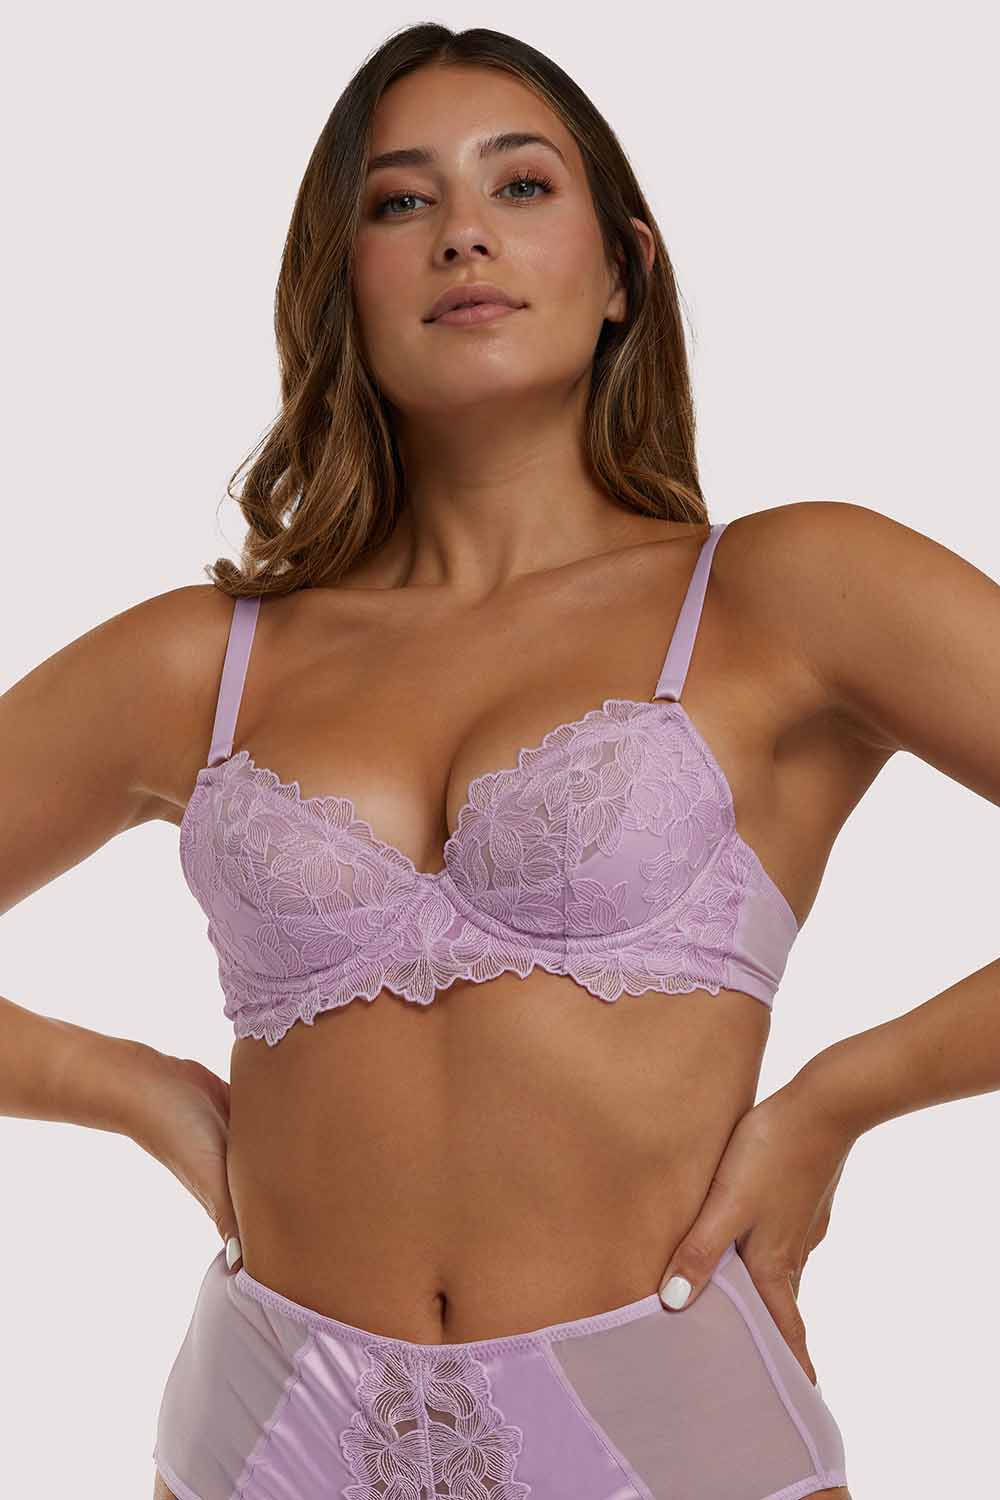 SBYOJLPB The Summer I Turned Pretty Woman'S Embroidered Glossy Comfortable  Breathable Bra Underwear No Rims (Purple)